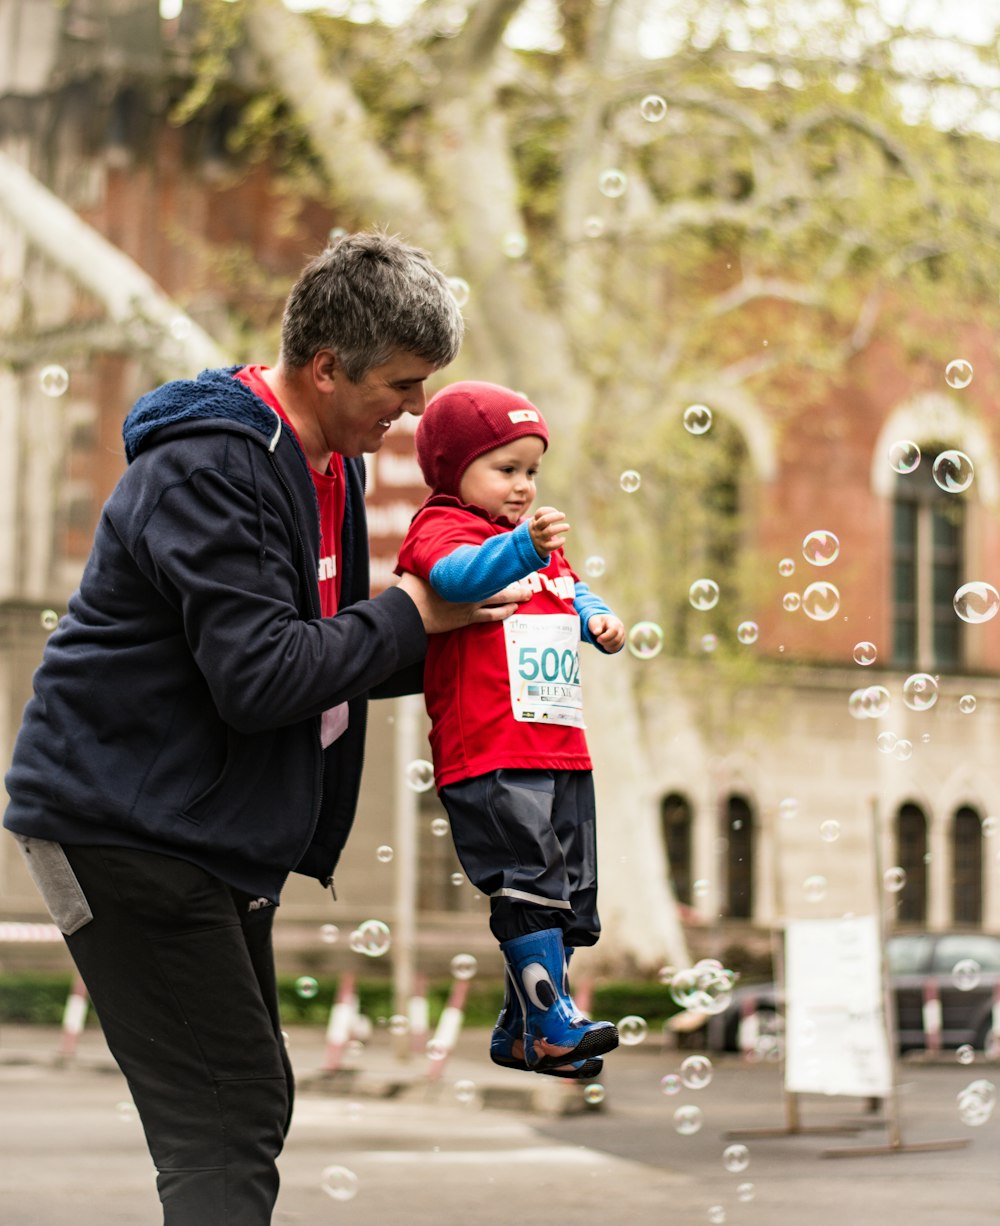 man carrying baby playing bubbles